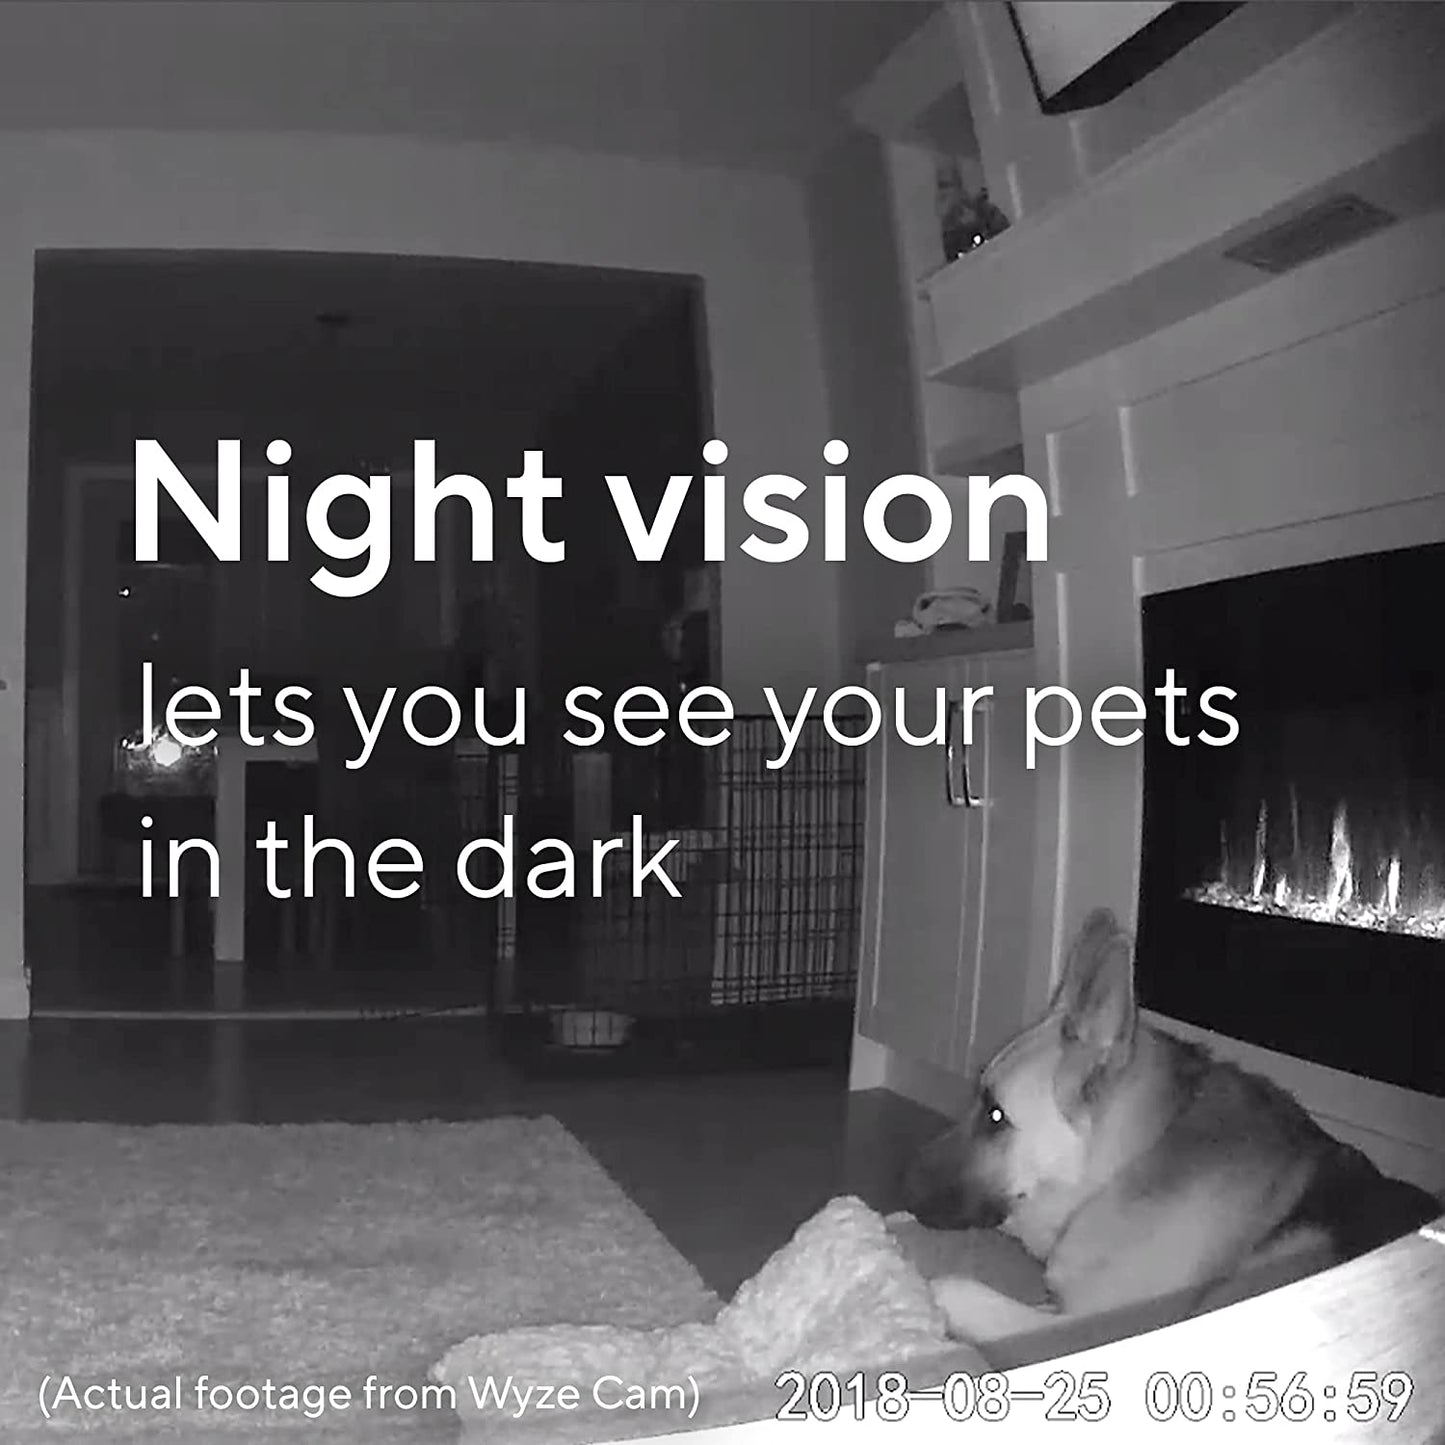 Image of a dog in black and white. Text overlay "Night Vision lets your see your pets in the dark."